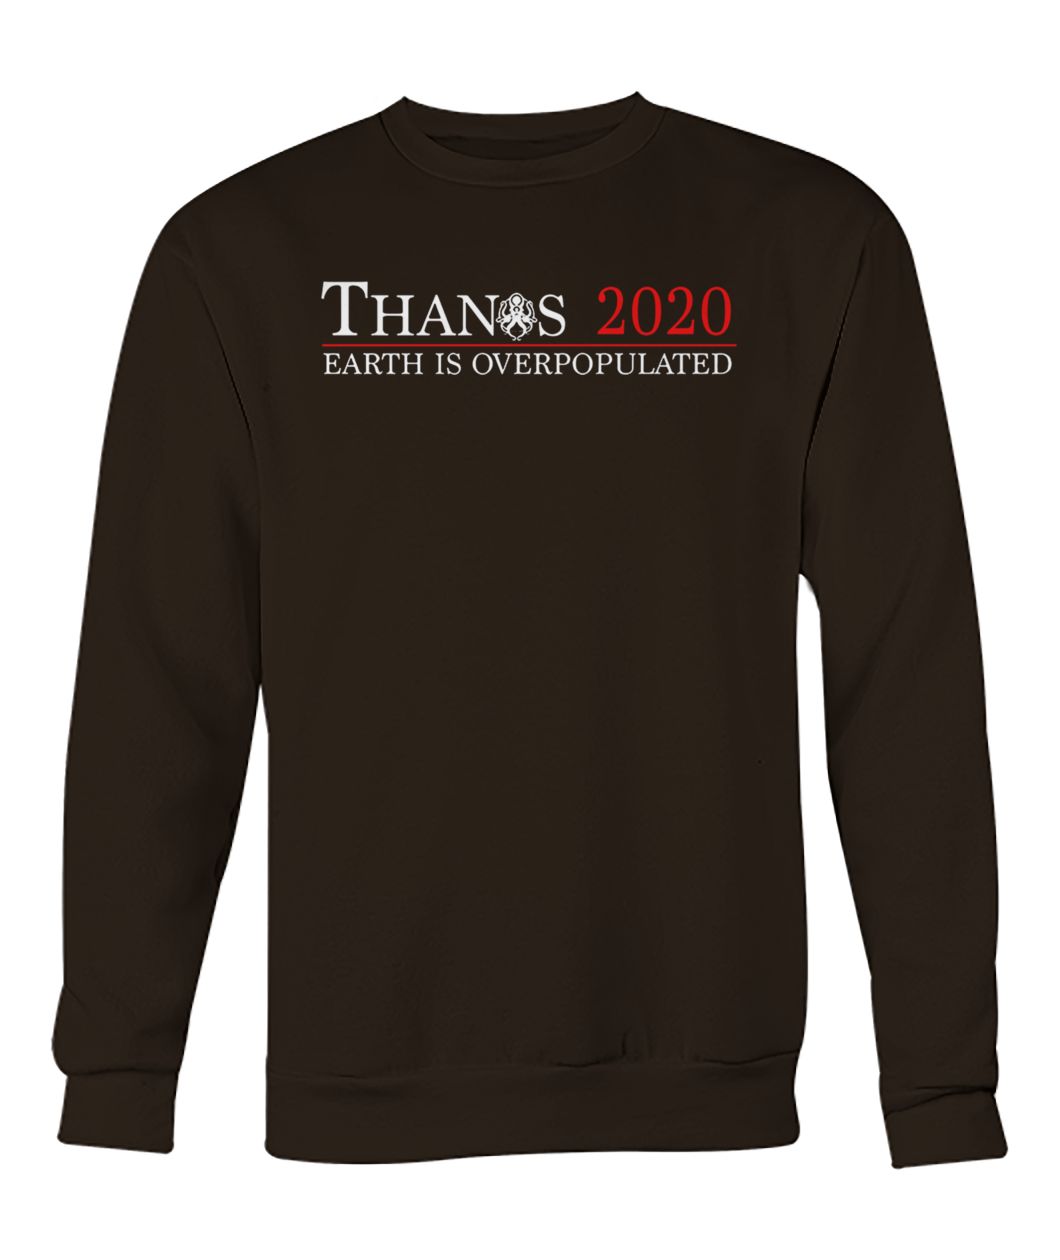 Avengers end game thanos 2020 earth is overpopulated crew neck sweatshirt